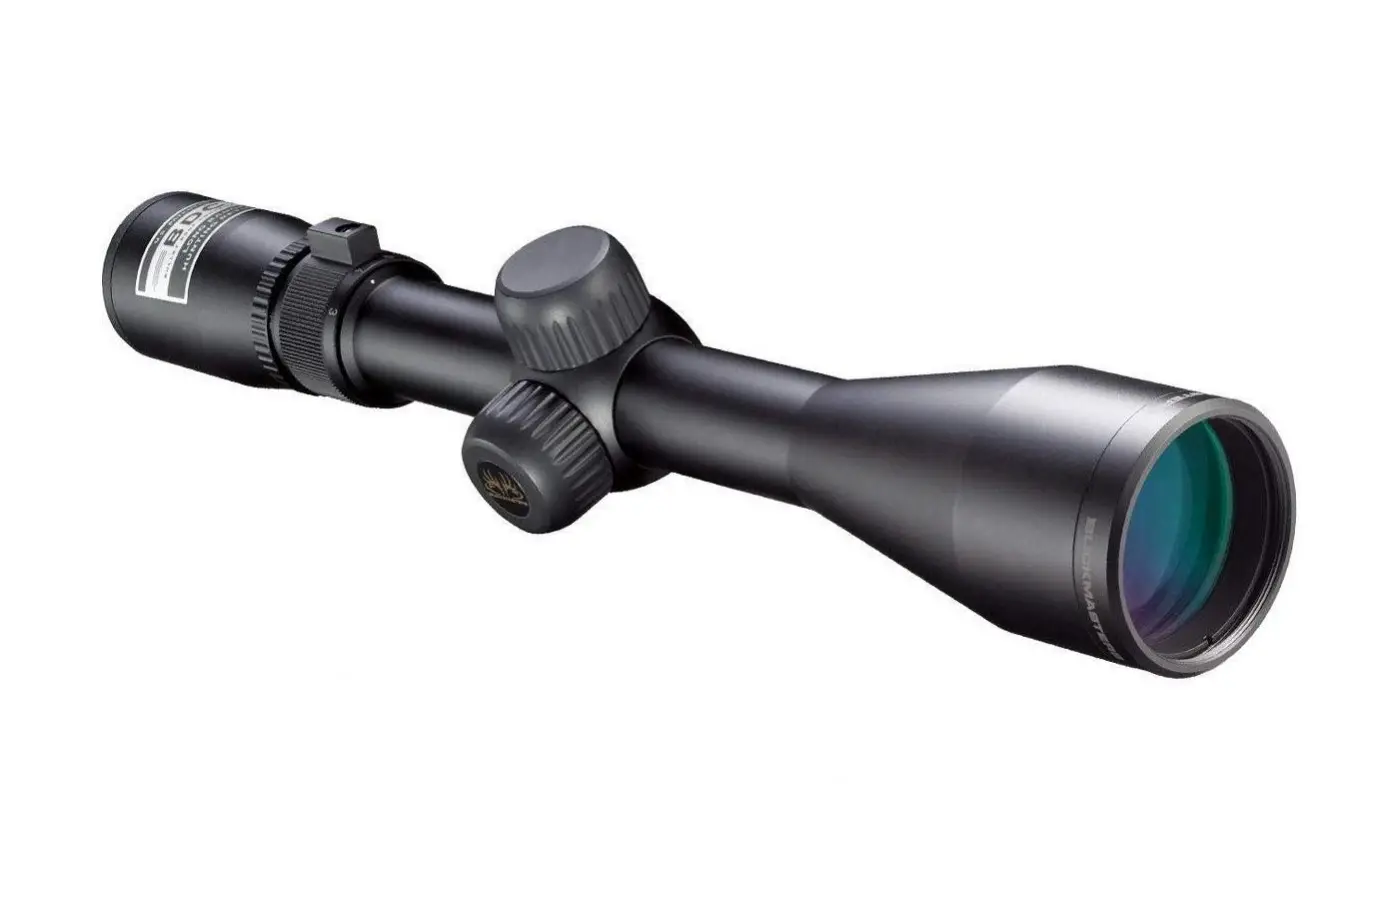 The Buckmaster II is an affordable option with all the features to pair with a deer rifle.